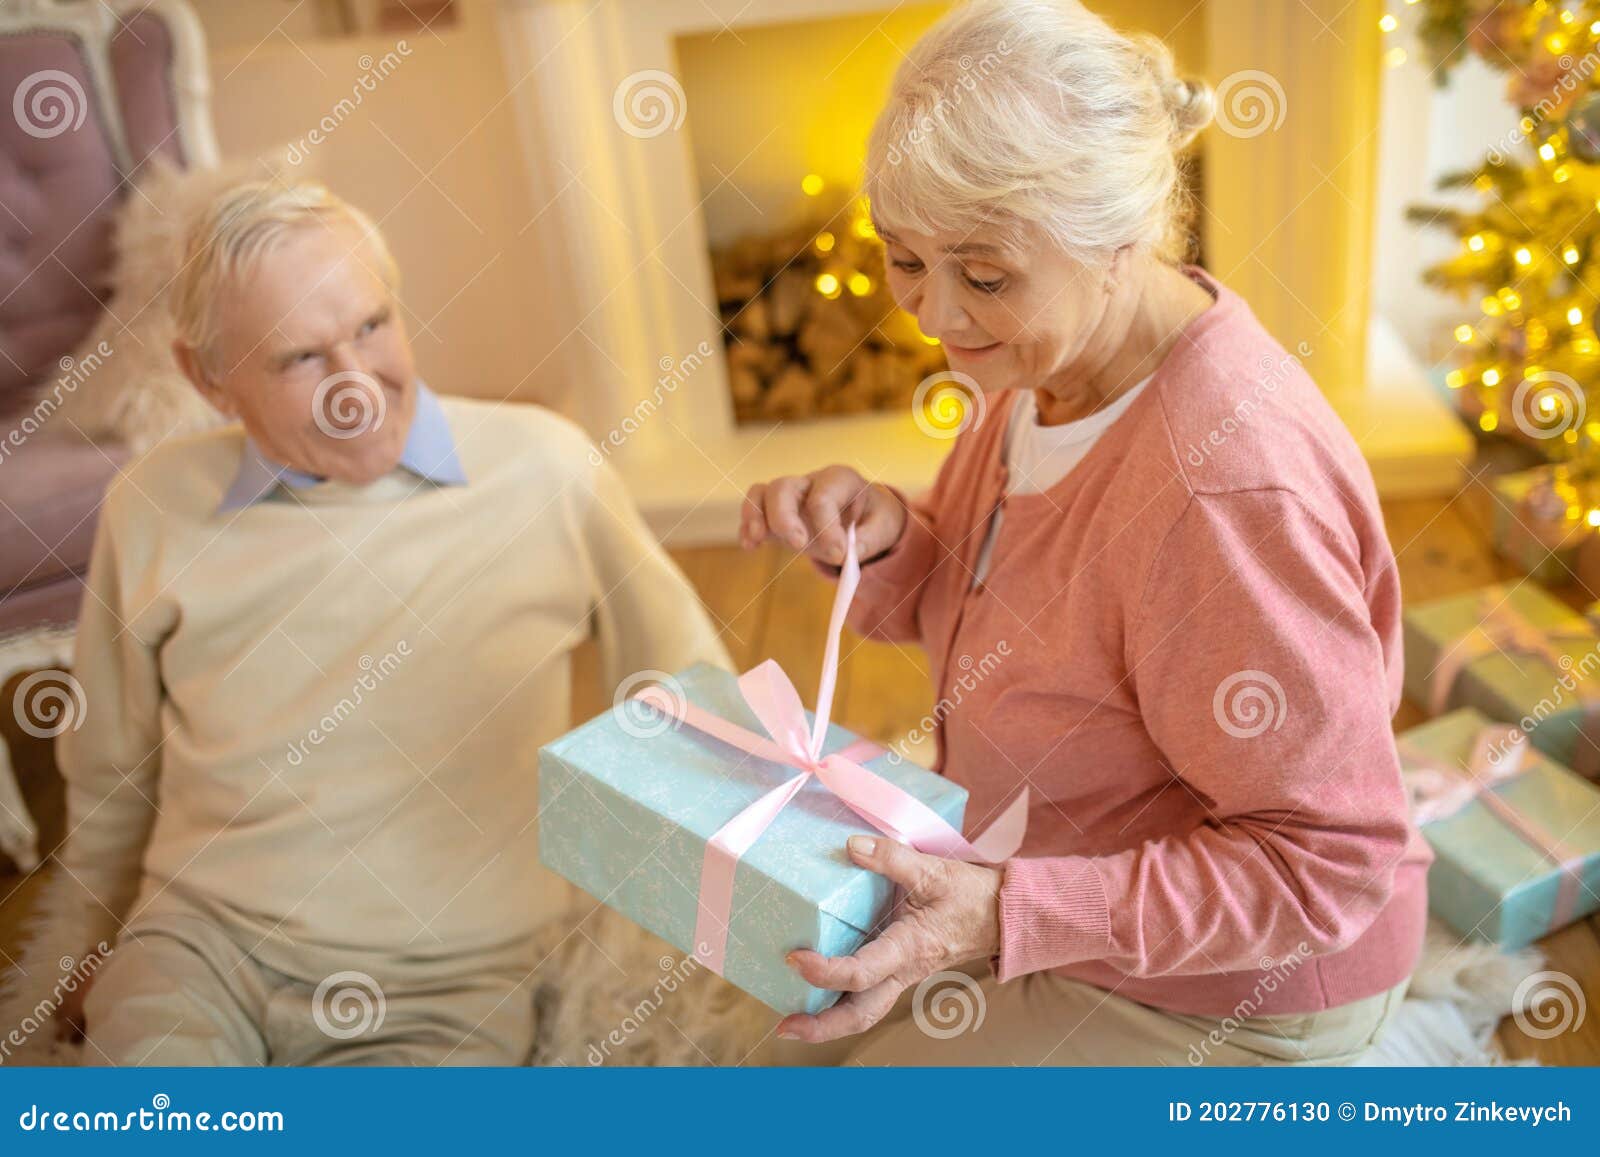 elderly woman opening christmas gift from her husband and looking anticipated